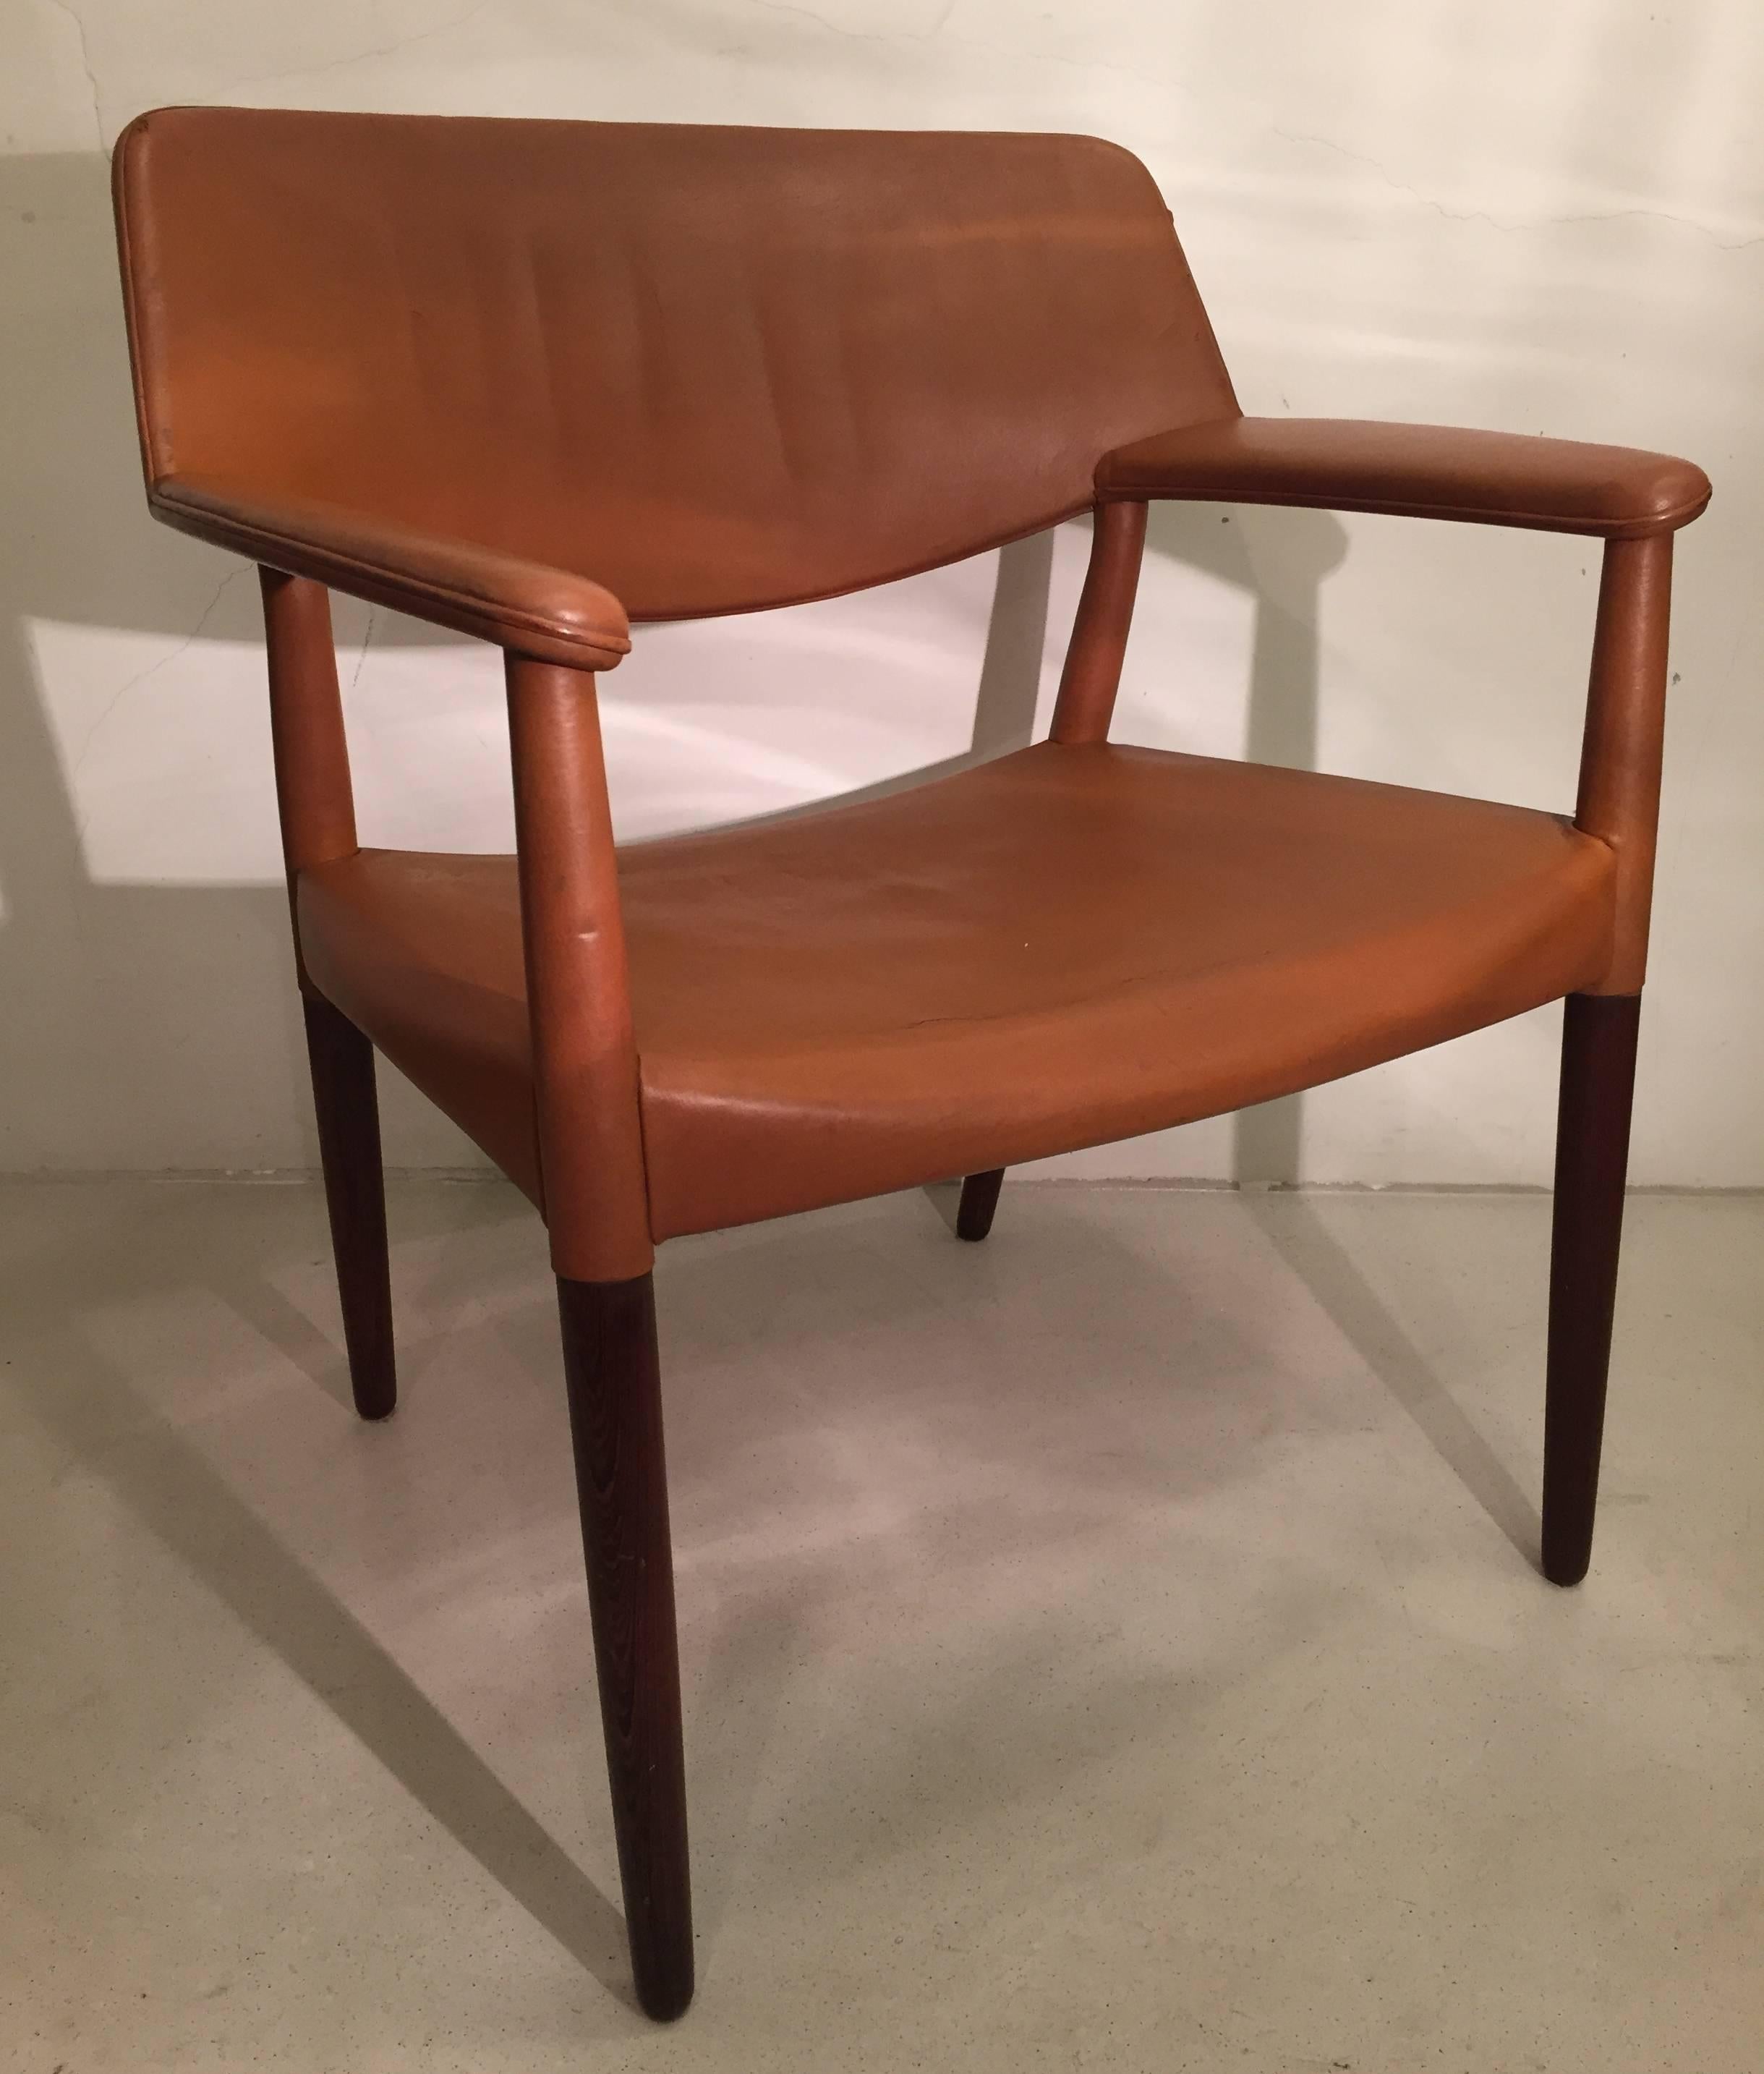 An outstanding armchair of solid wenge wood and original cognac leather designed by architects Ejner Larsen and Aksel Bender Madsen and produced in 1964 by cabinetmaker Willy Beck.